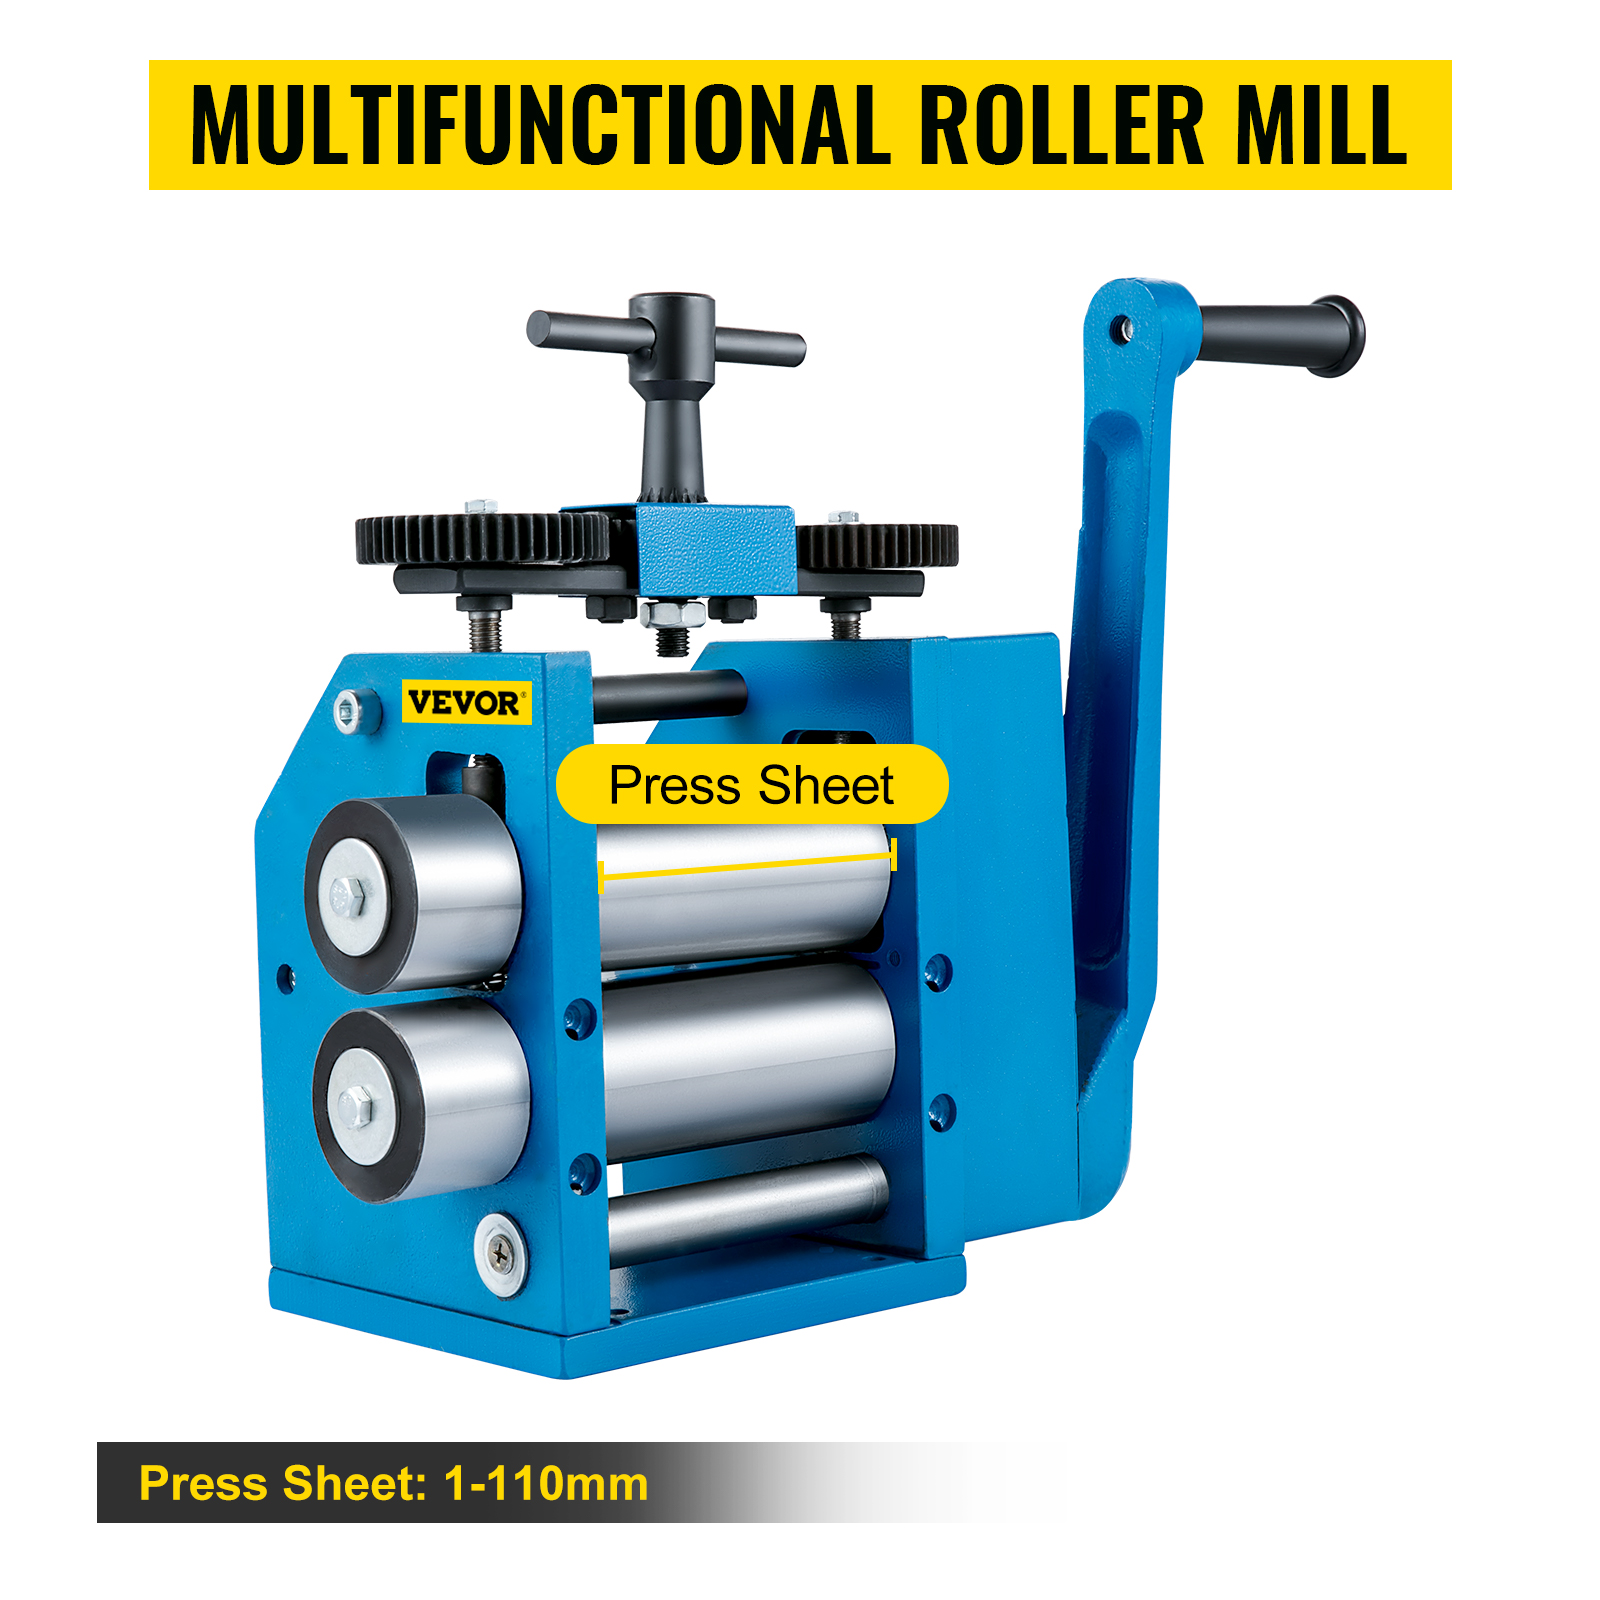 VEVOR Rolling Mills 3/76mm Jewelry Rolling Mill Machine Gear Ratio 1:2.5 Wire Roller Mill 0.1-7mm Press Thickness Manual Combination Rolling Mill